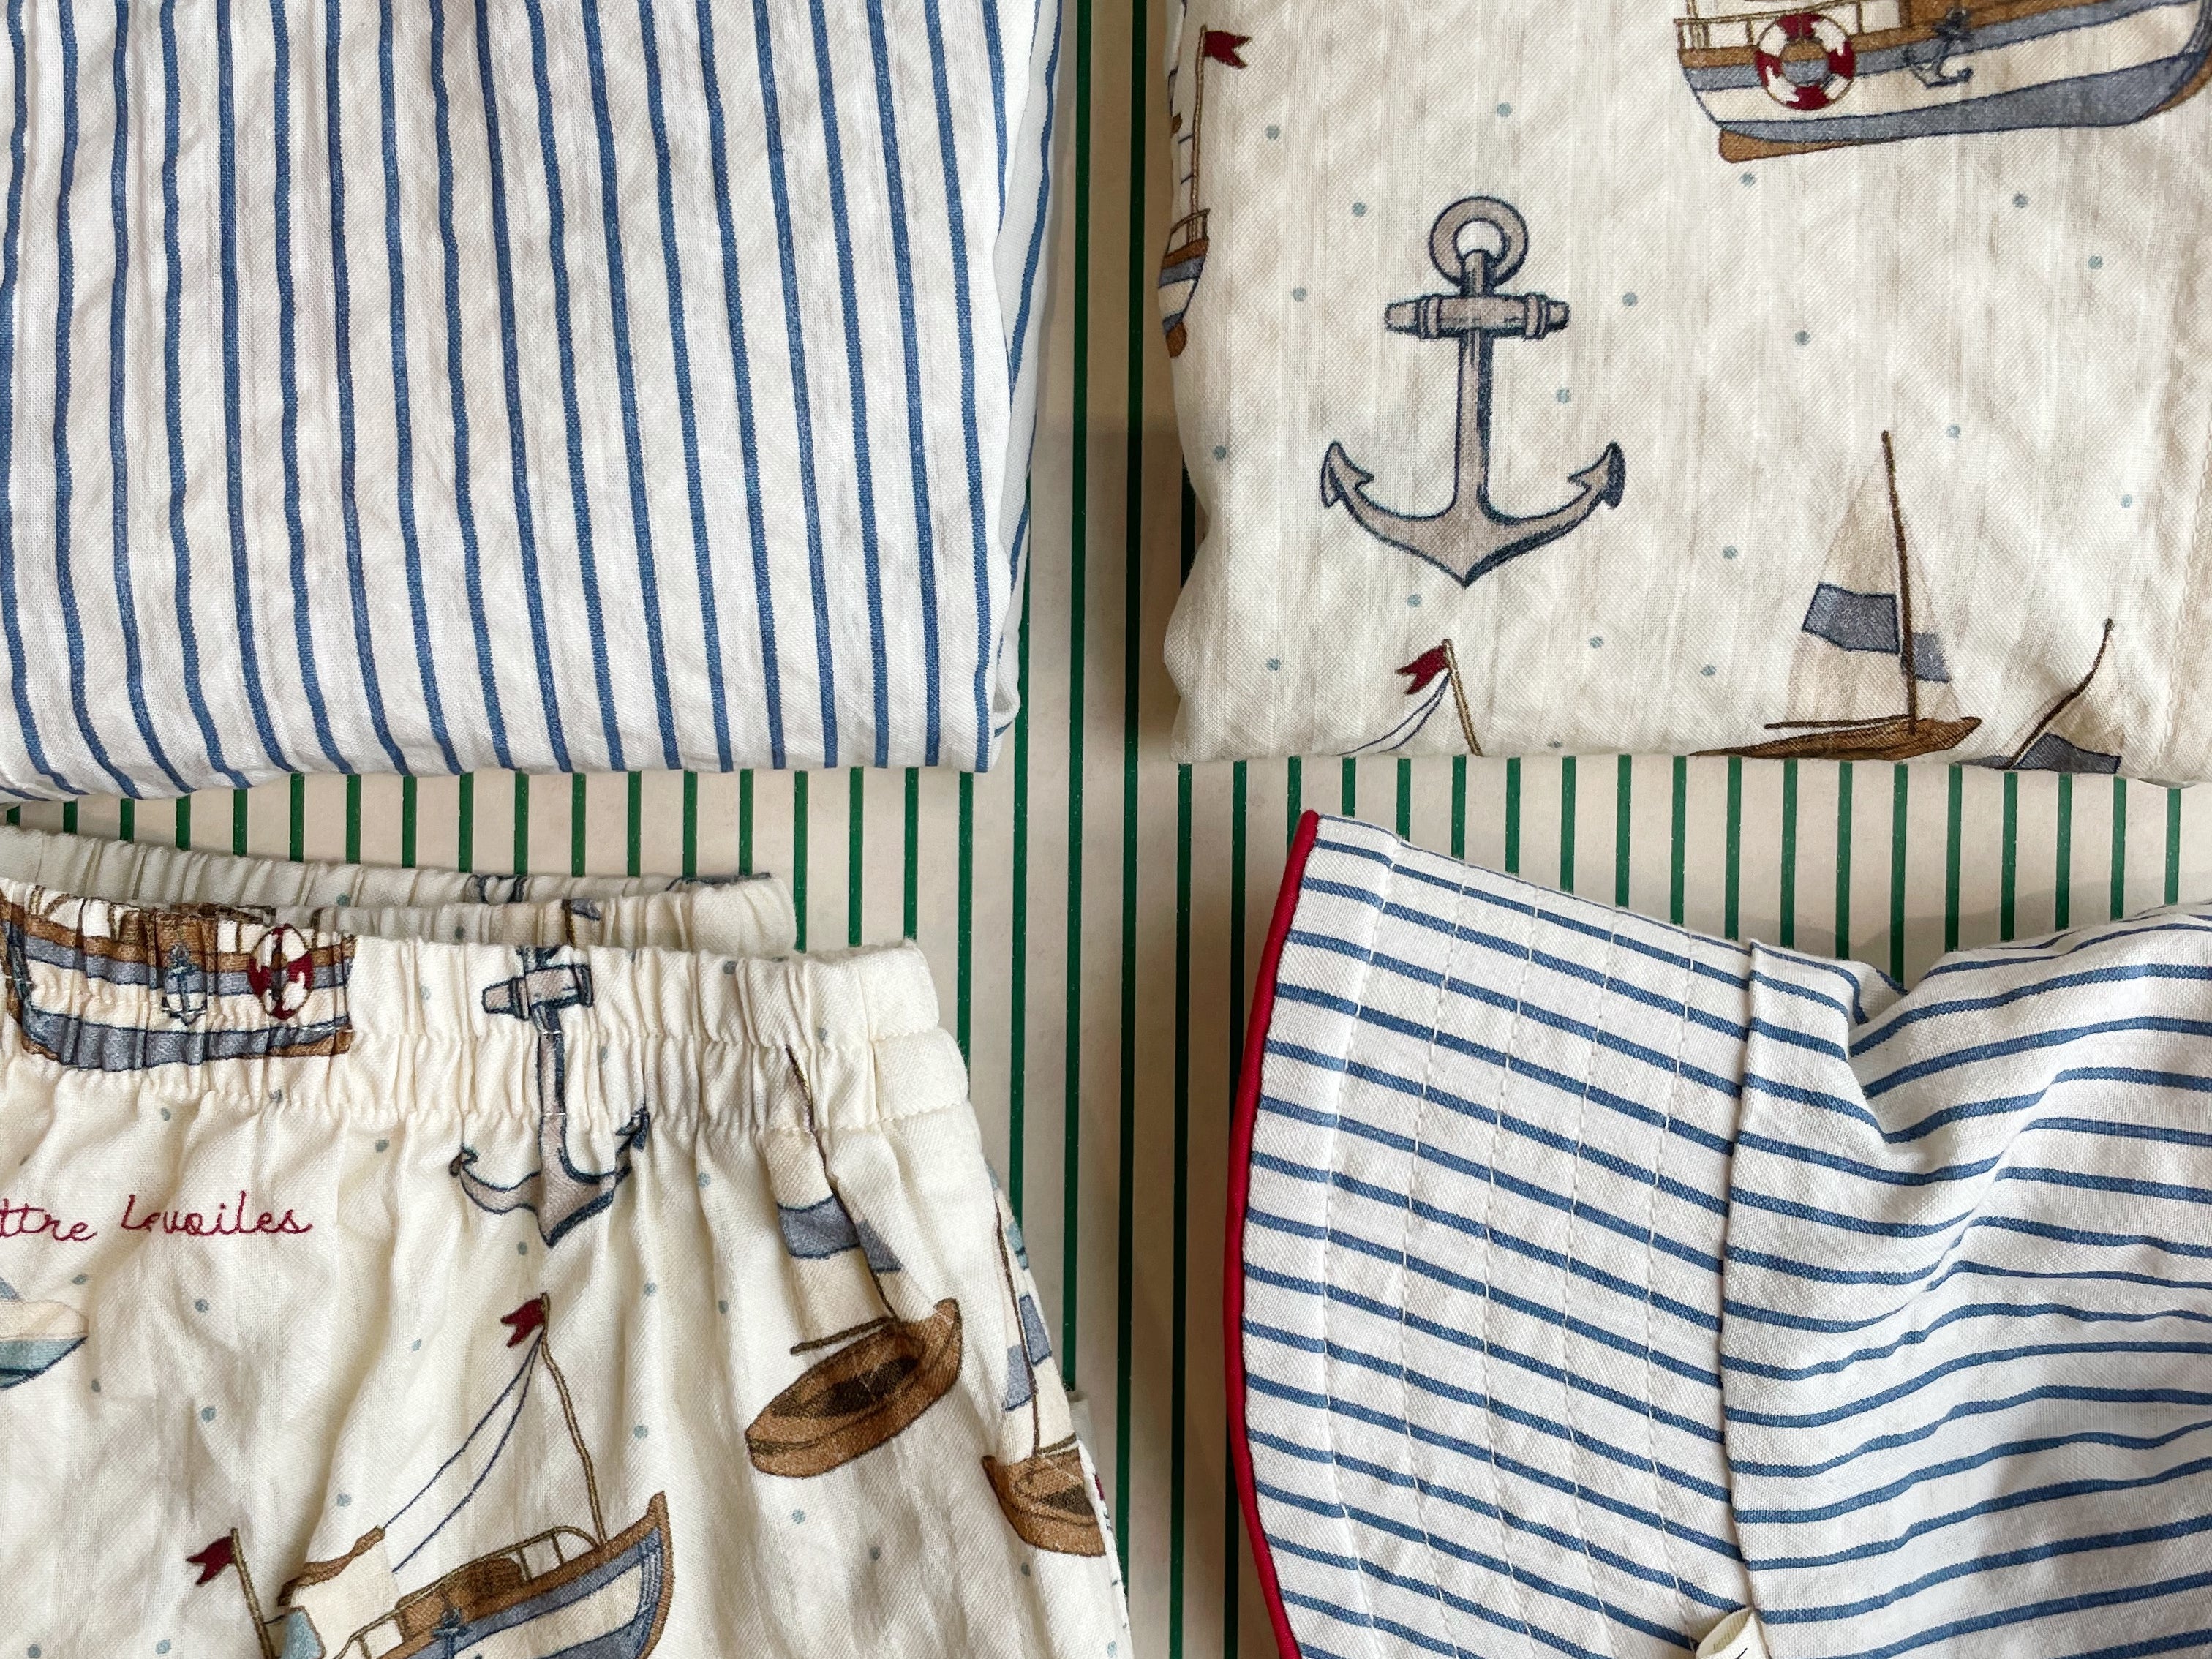 Konges Sløjd A/S WOVEN SHORTS & BLOOMERS SAIL AWAY